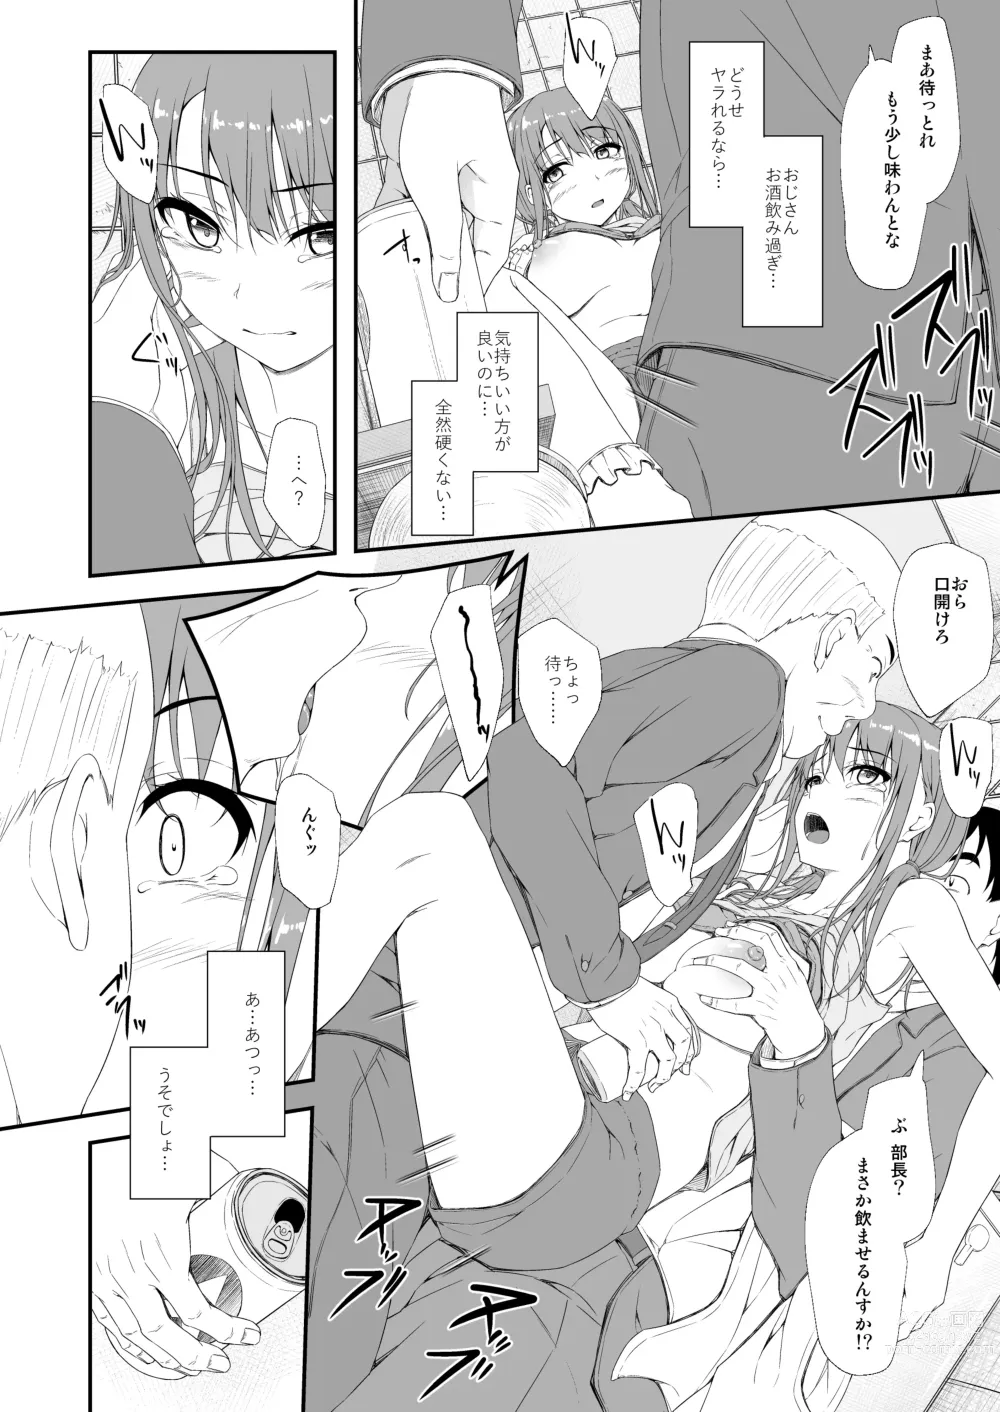 Page 11 of doujinshi Re:Temptation 6